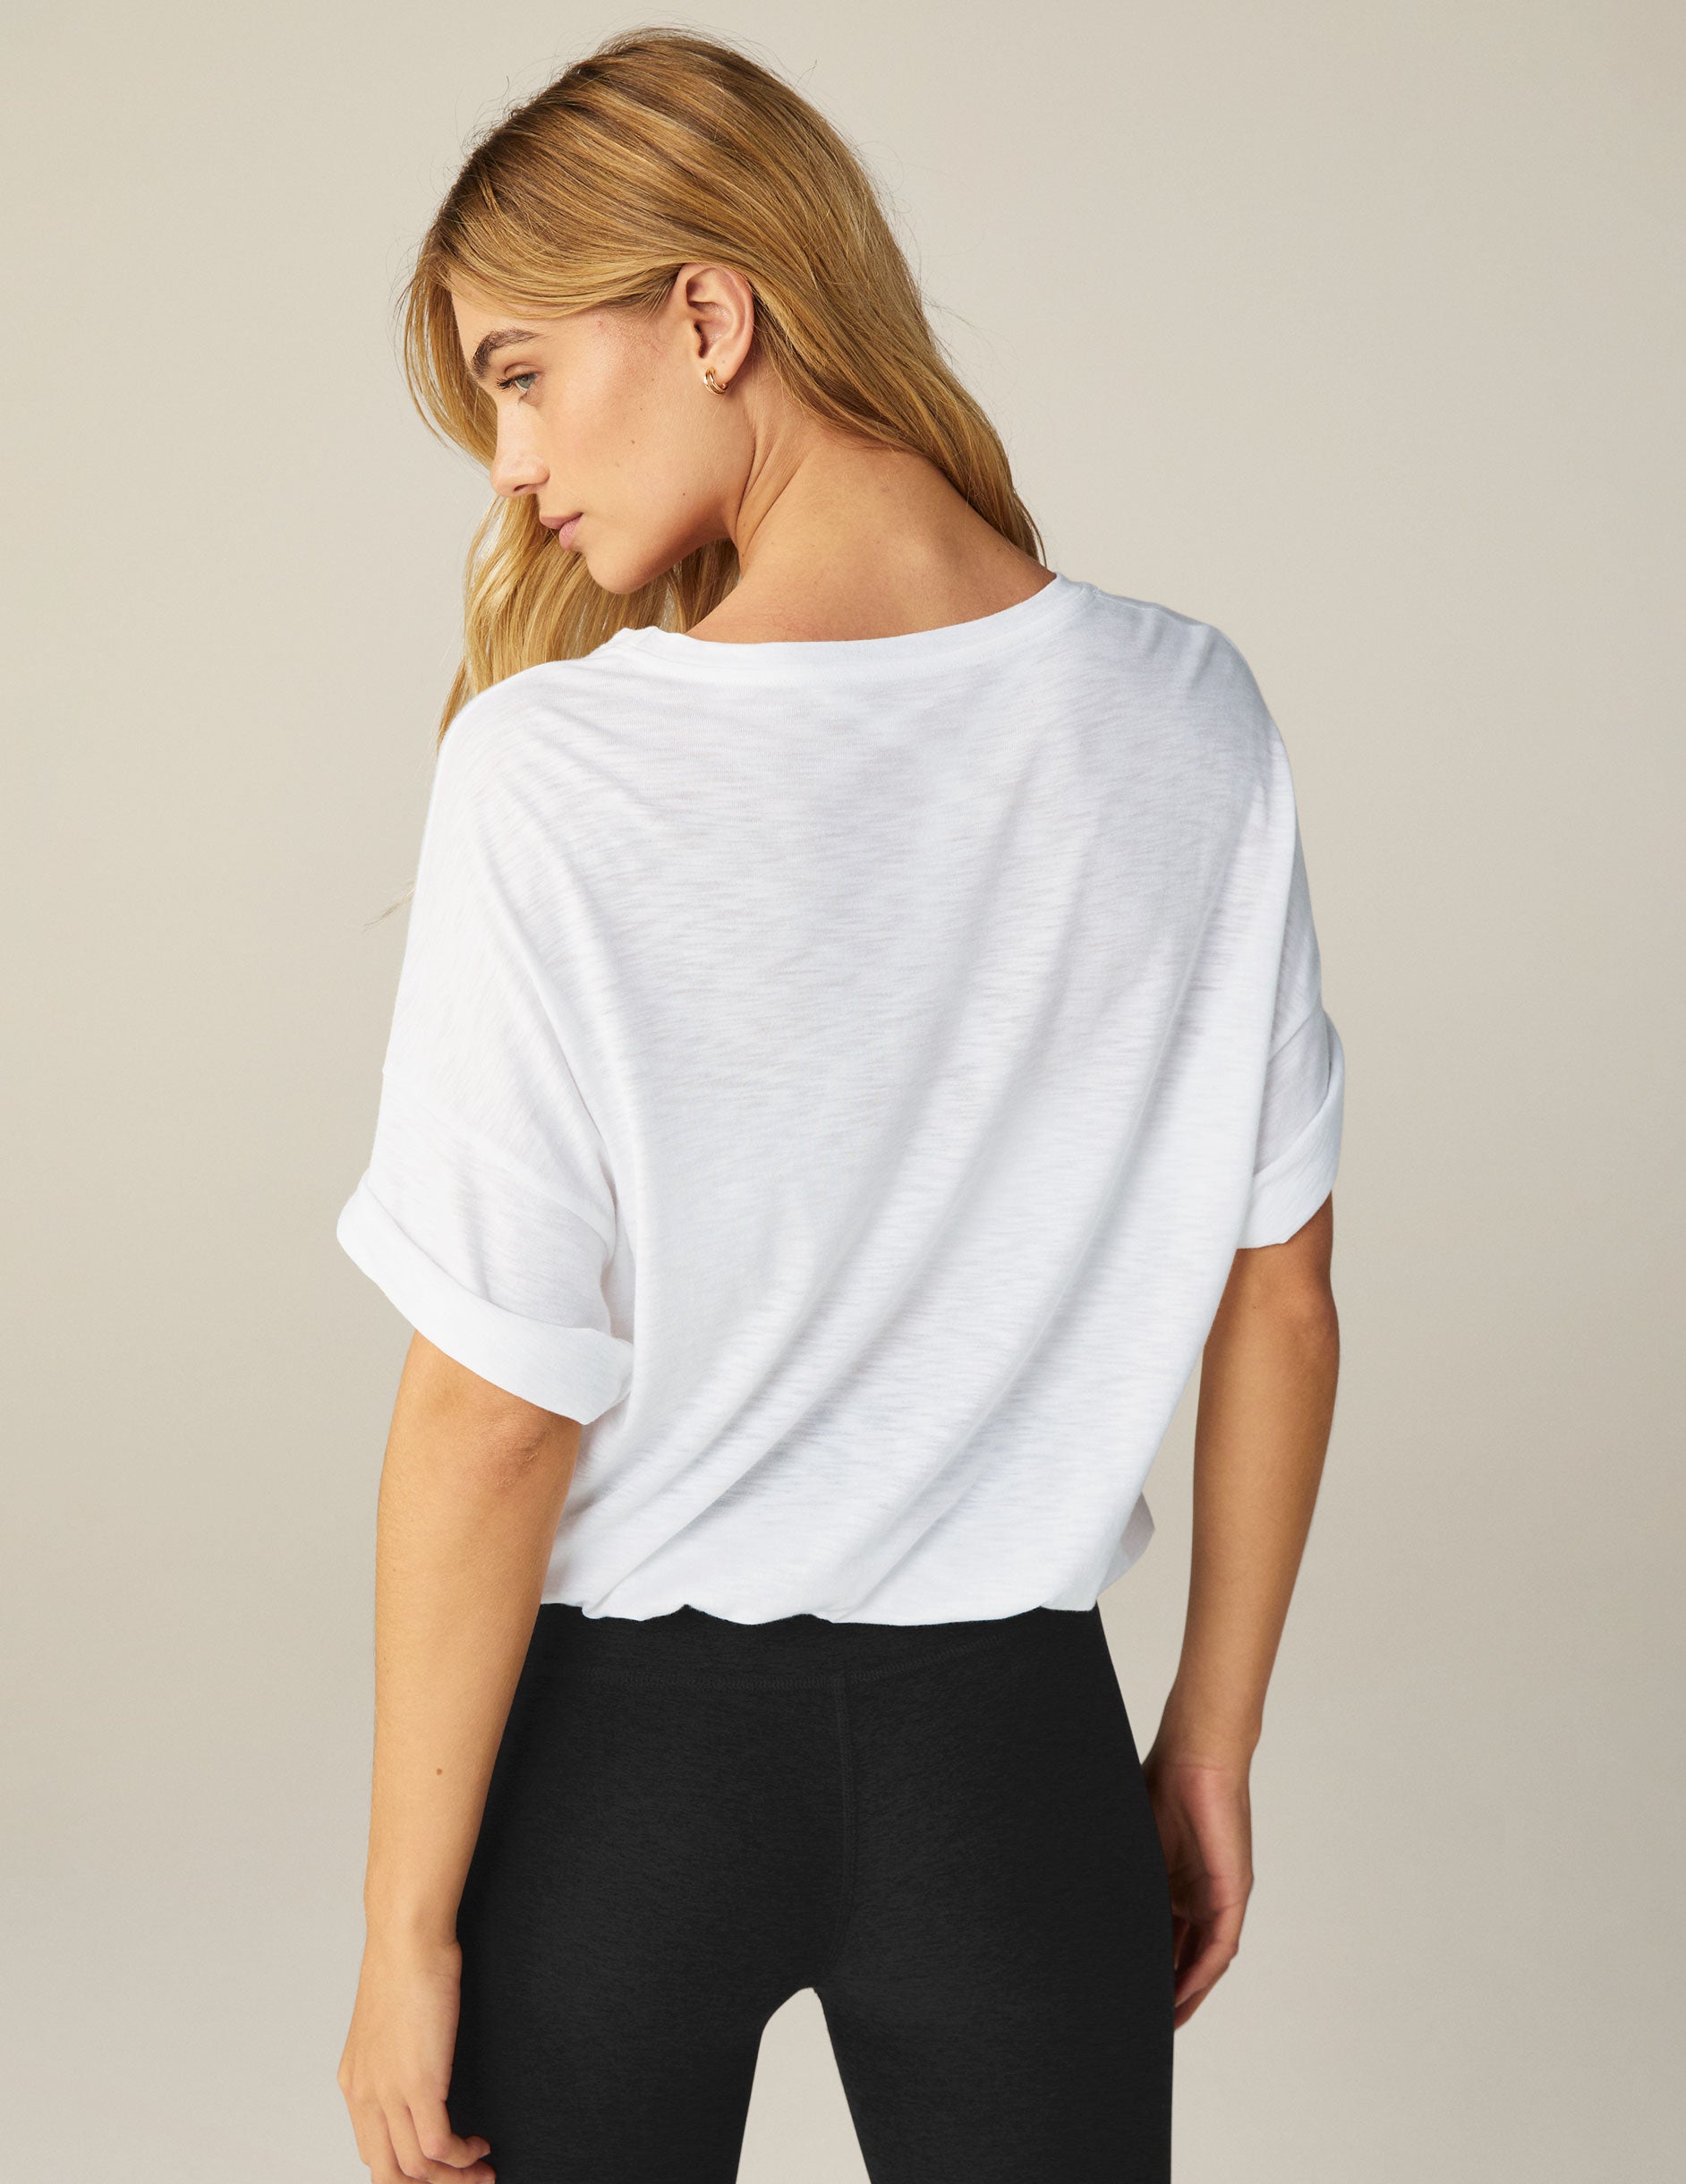 white short sleeve top with tie detail